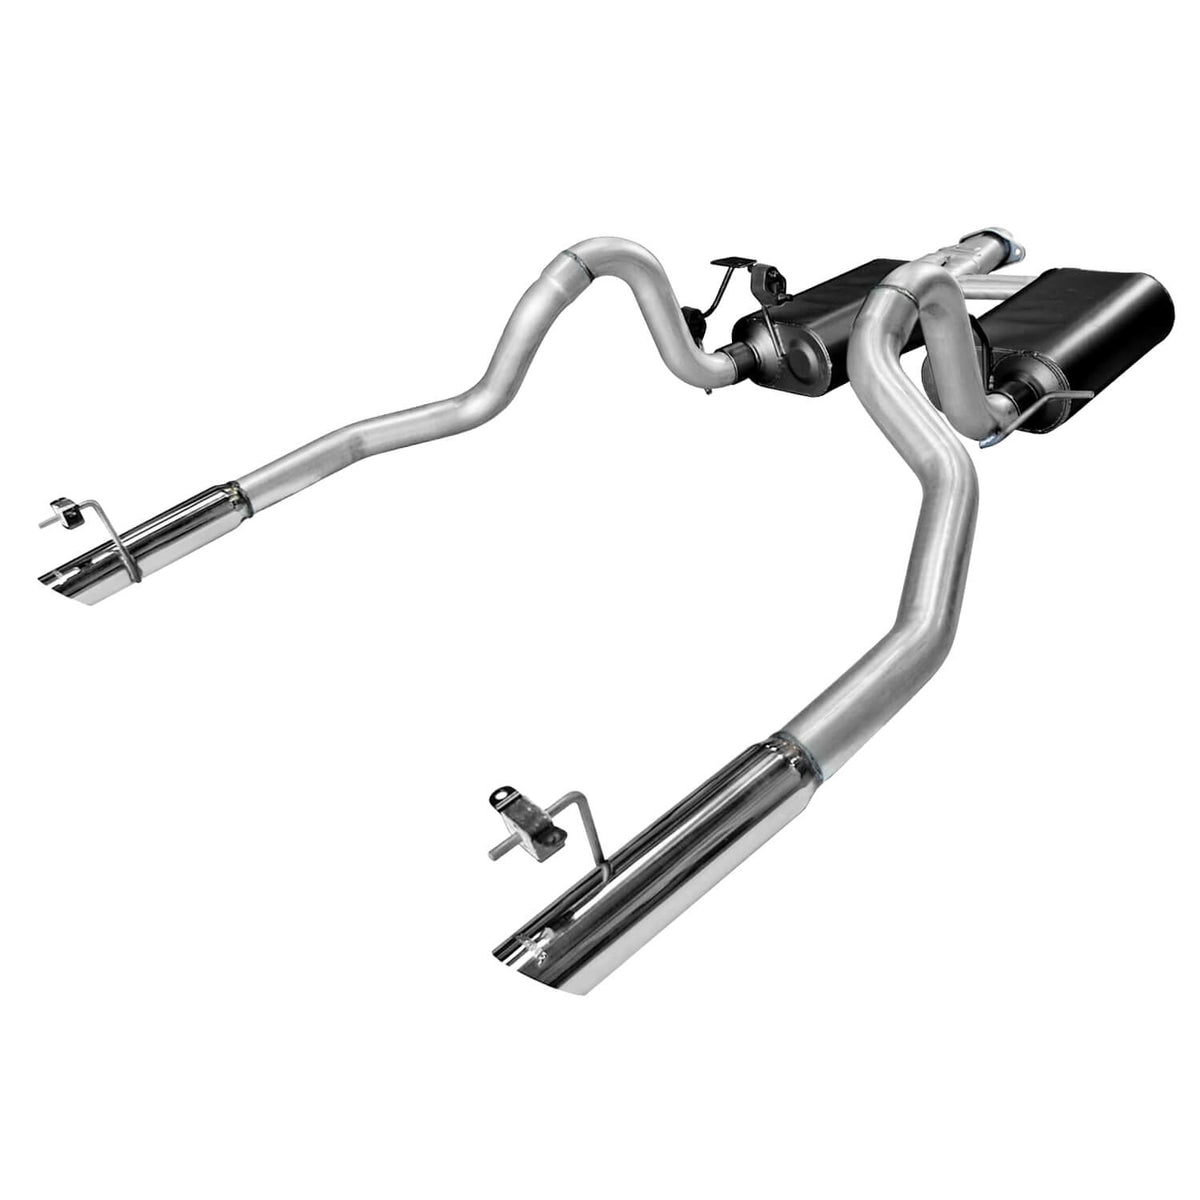 FLOWMASTER FORCE II CAT-BACK EXHAUST SYSTEM | 1999-2004 Ford Mustang LX 3.8L